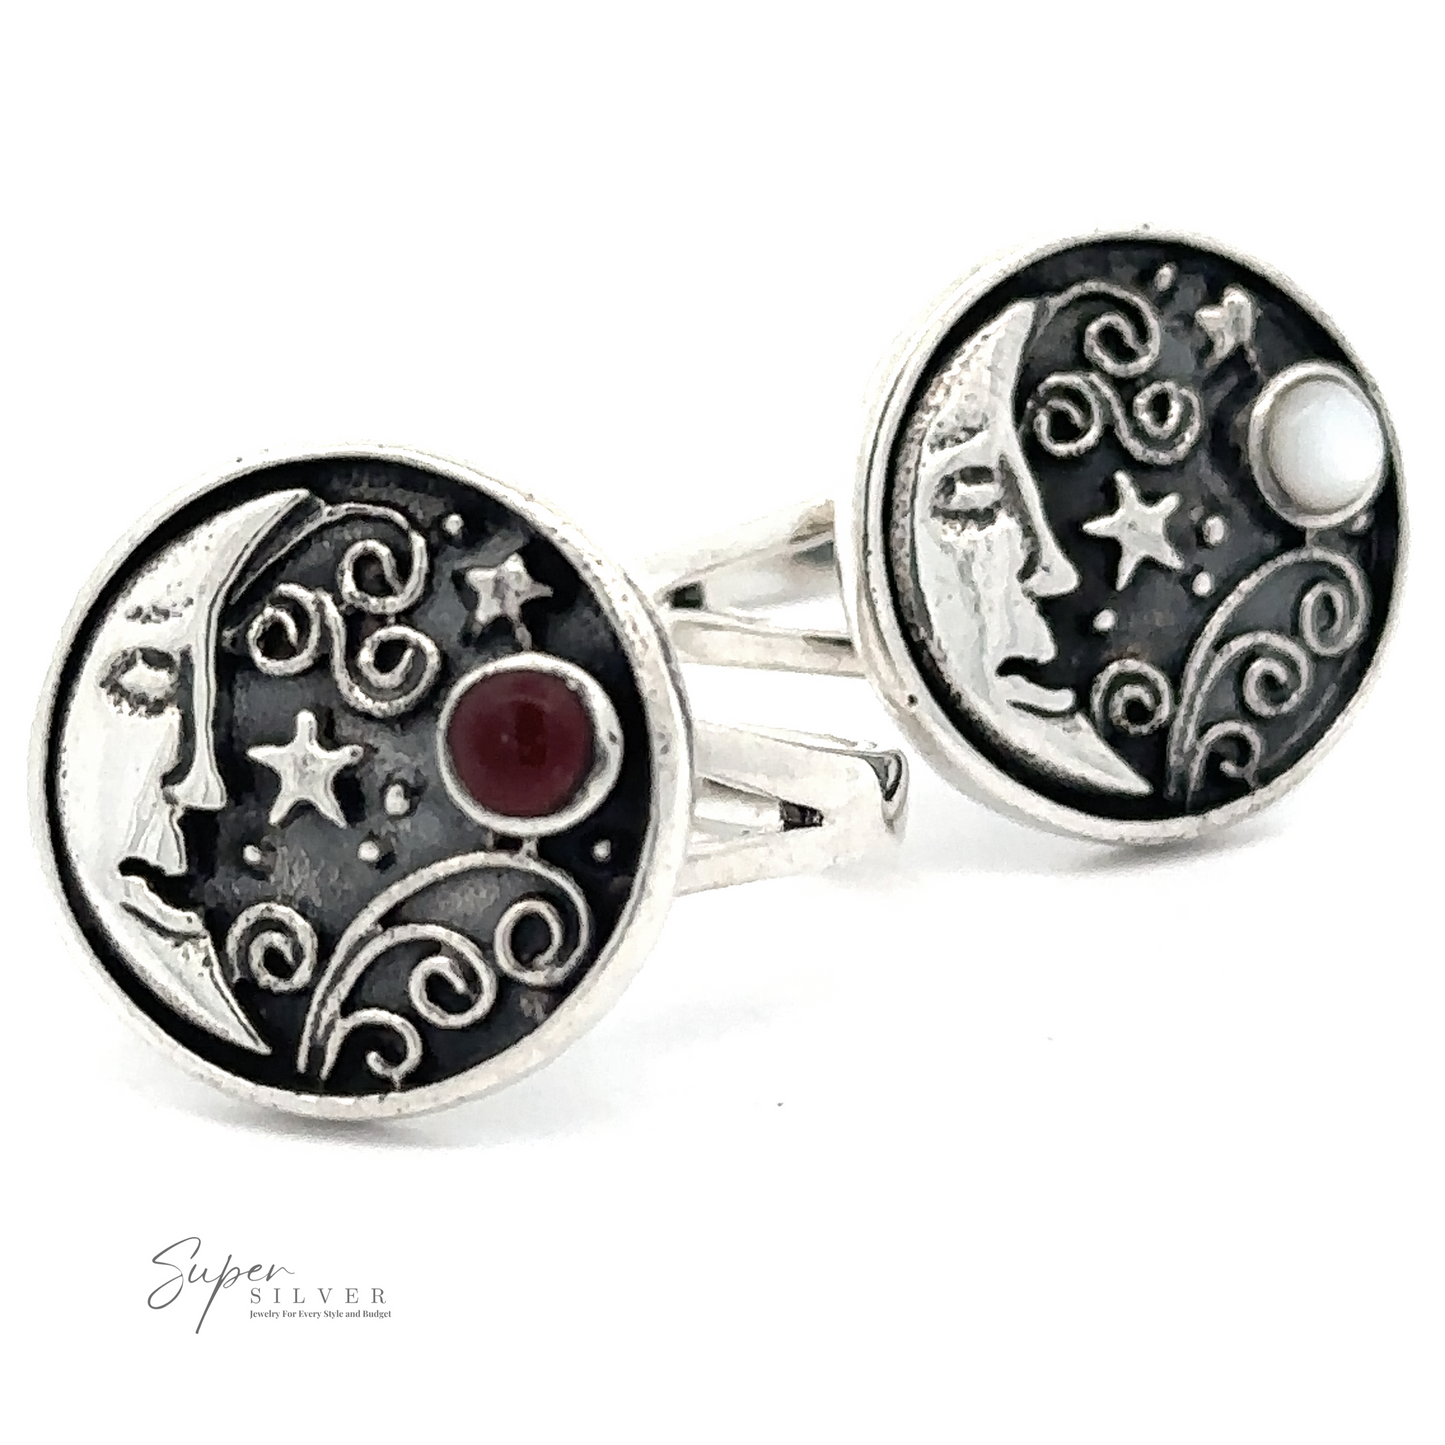 Two .925 Sterling Silver rings depicting a crescent moon with a sleeping face and swirling designs, featuring a red stone and a white stone, by Super Silver. These Circular Vintage Style Moon Rings With Inlaid Stone exude Bohemian charm, making them an enchanting addition to any jewelry collection.